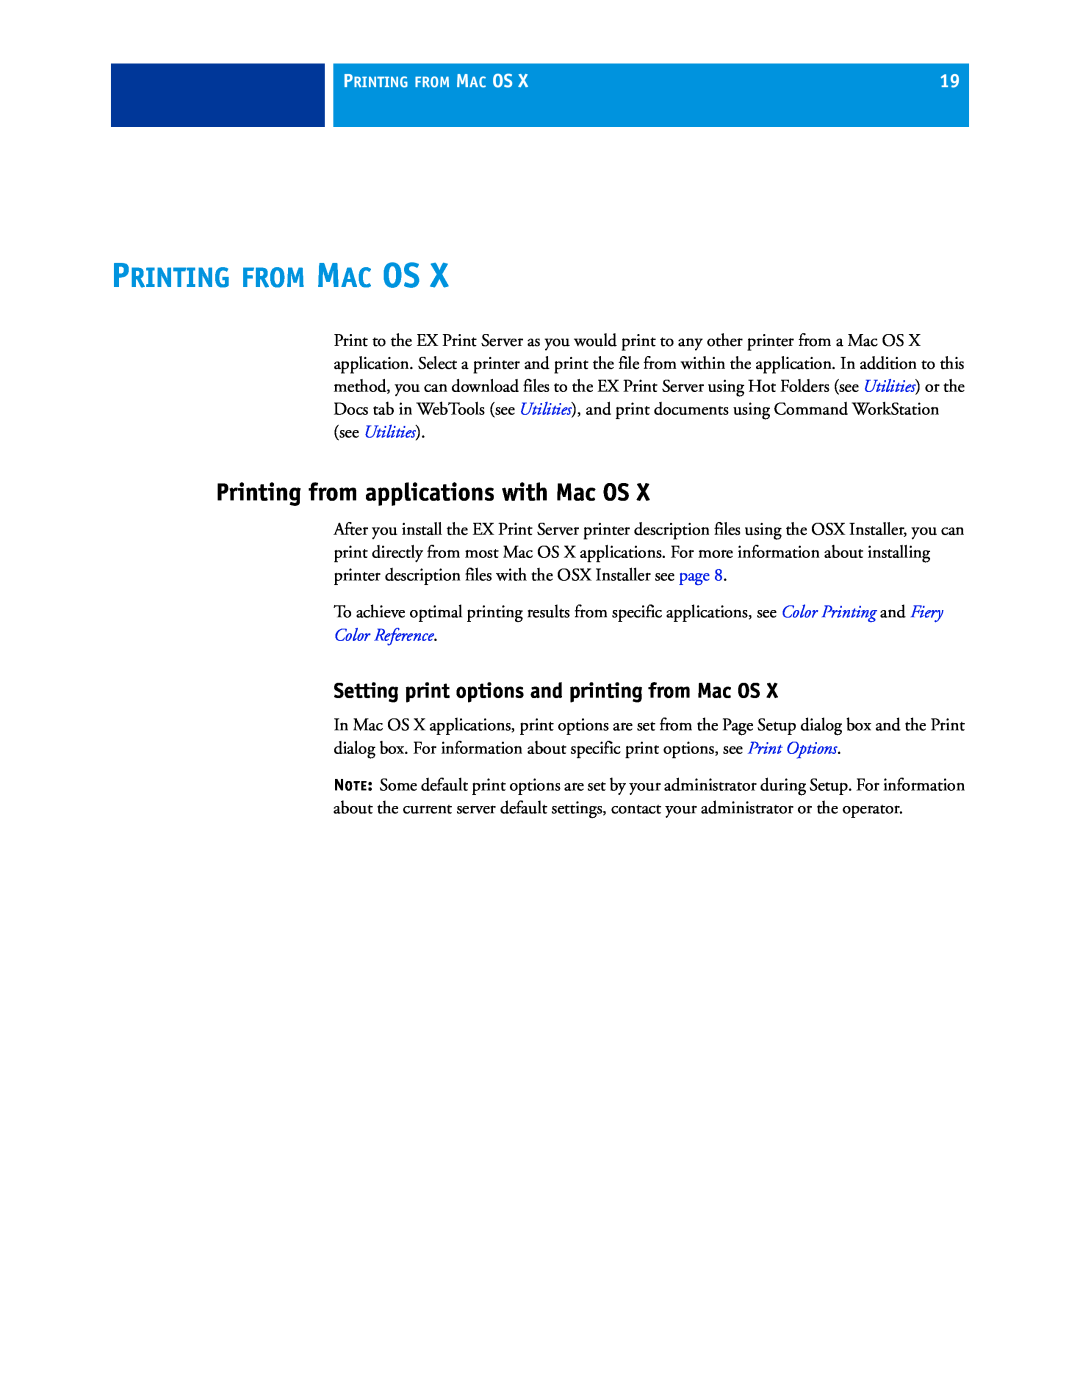 Xerox 45069888 manual Printing From Mac Os, Printing from applications with Mac OS, Color Reference 